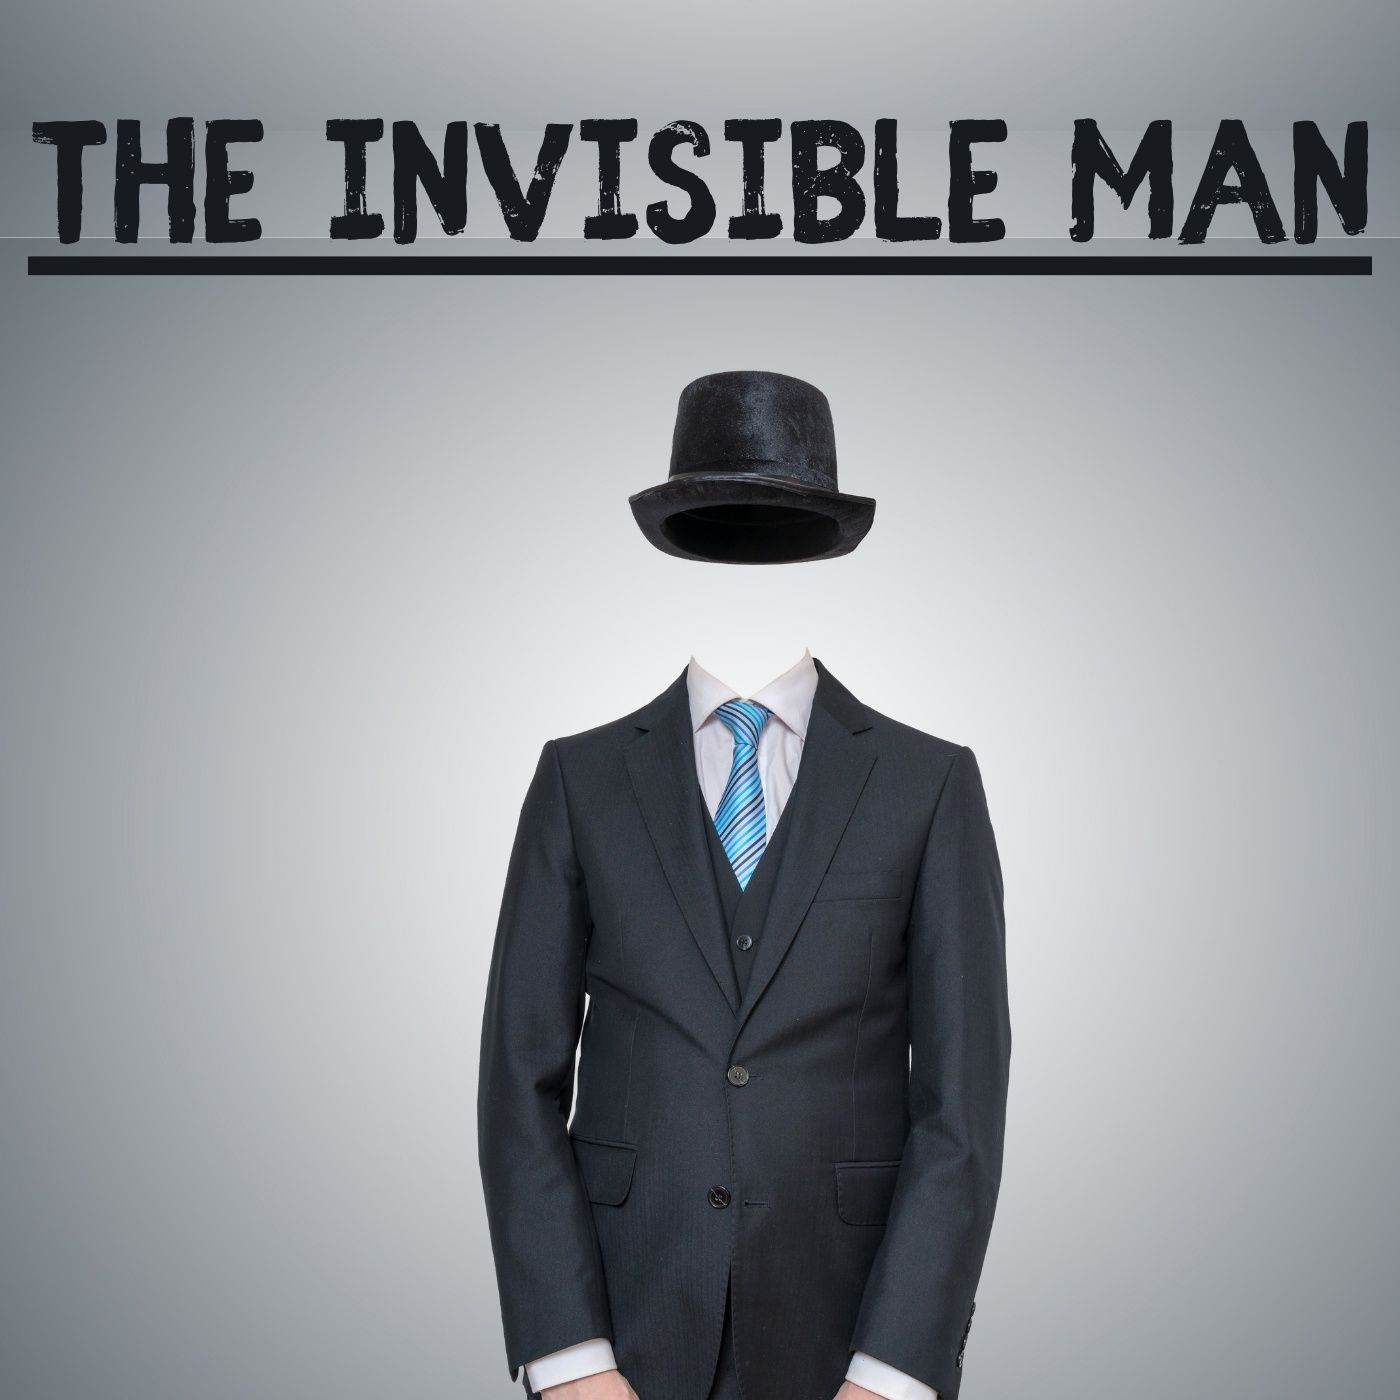 The Invisible Man – H.G. Wells